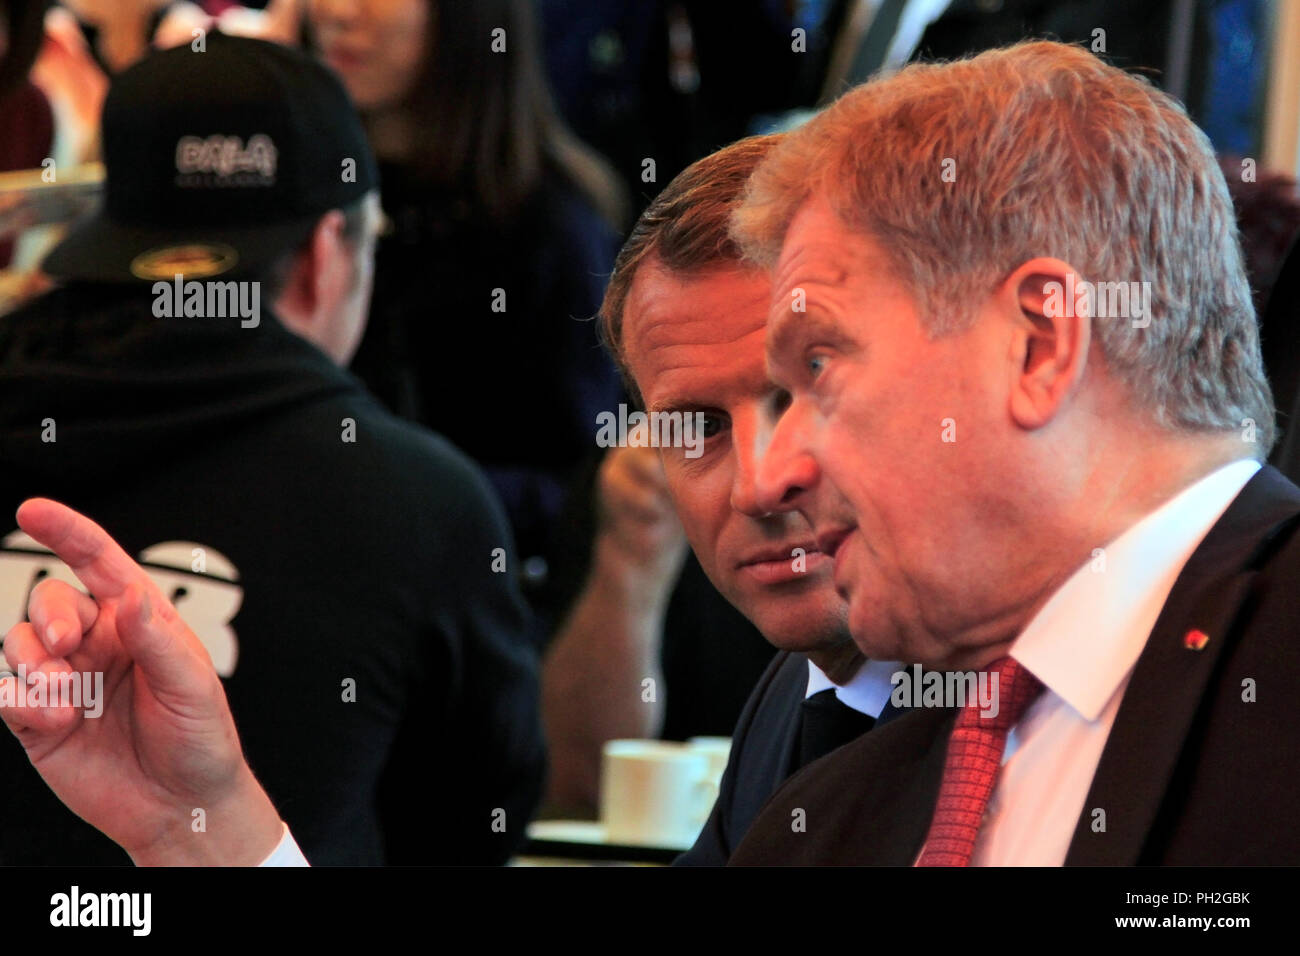 Helsinki, Finland. August 30, 2018. French President Emmanuel Macron (C) and Finnish President Sauli Niinistö (R) have a cup of coffee at a small Market Square cafeteria after their joint press conference. Credit: Taina Sohlman/Alamy Live News Stock Photo